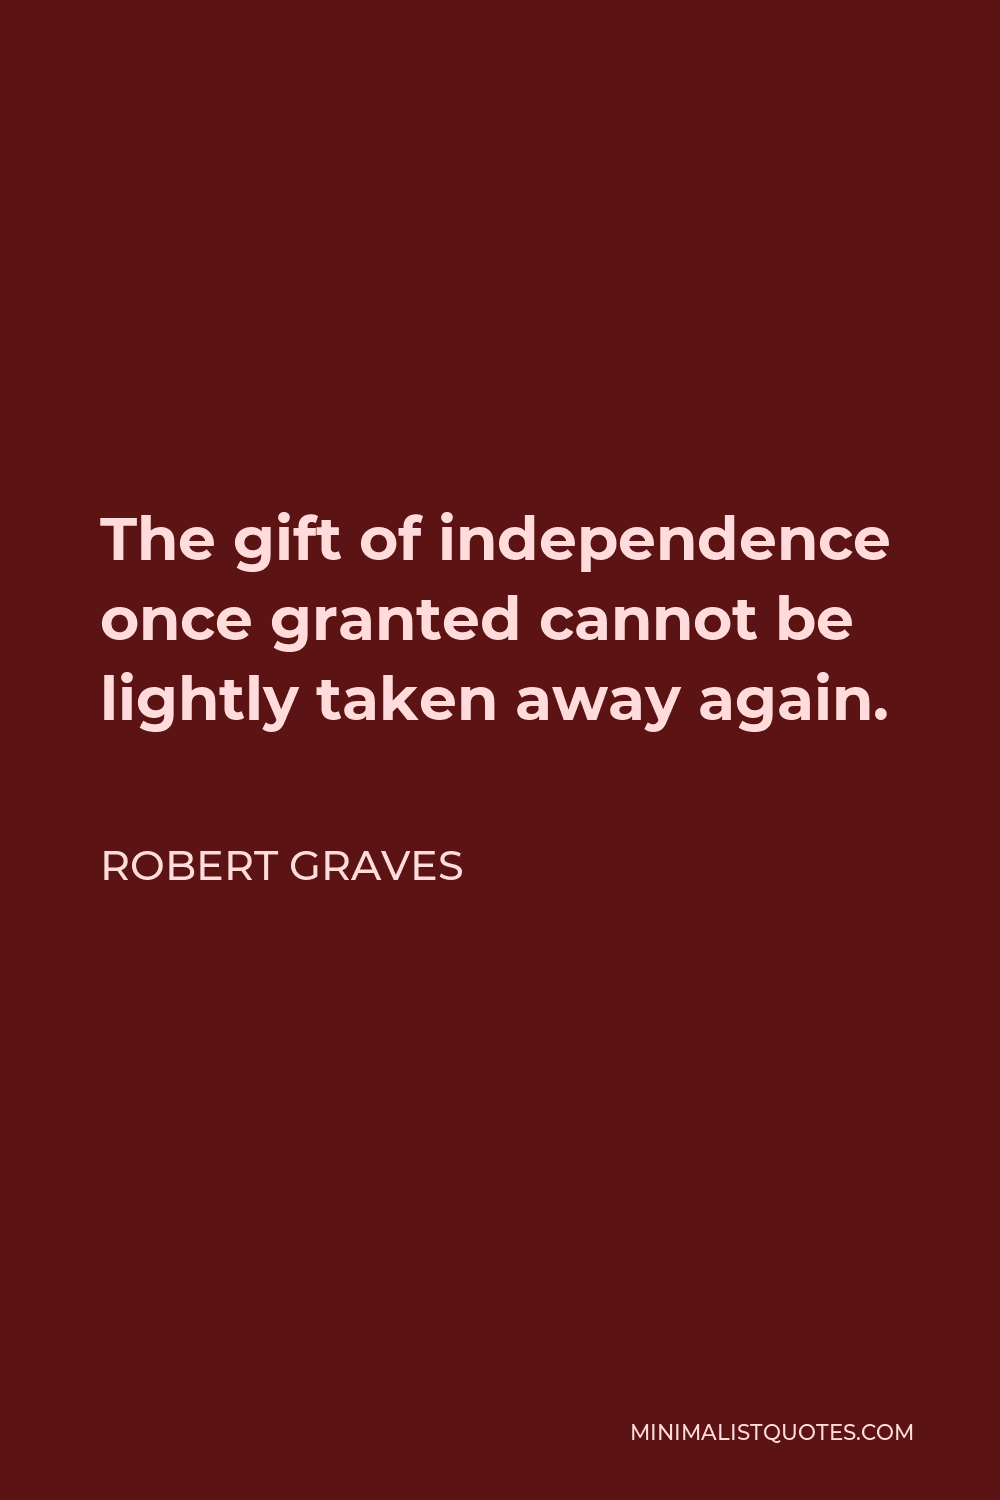 Robert Graves Quote - The gift of independence once granted cannot be lightly taken away again.